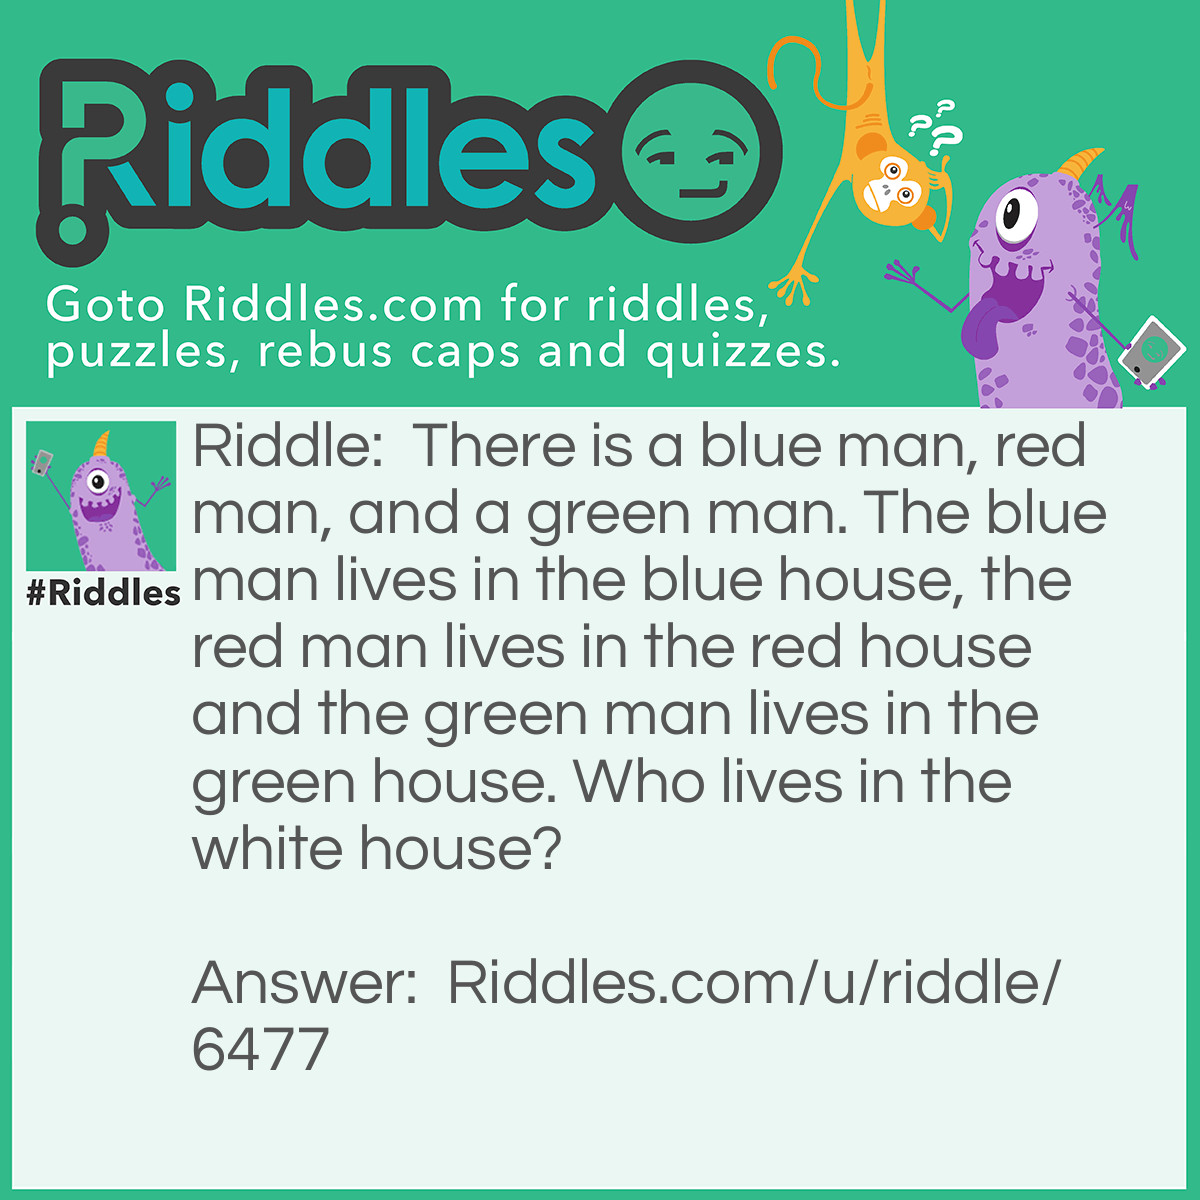 Riddle: There is a blue man, red man, and a green man. The blue man lives in the blue house, the red man lives in the red house and the green man lives in the green house. Who lives in the white house? Answer: The president of the United States of America.